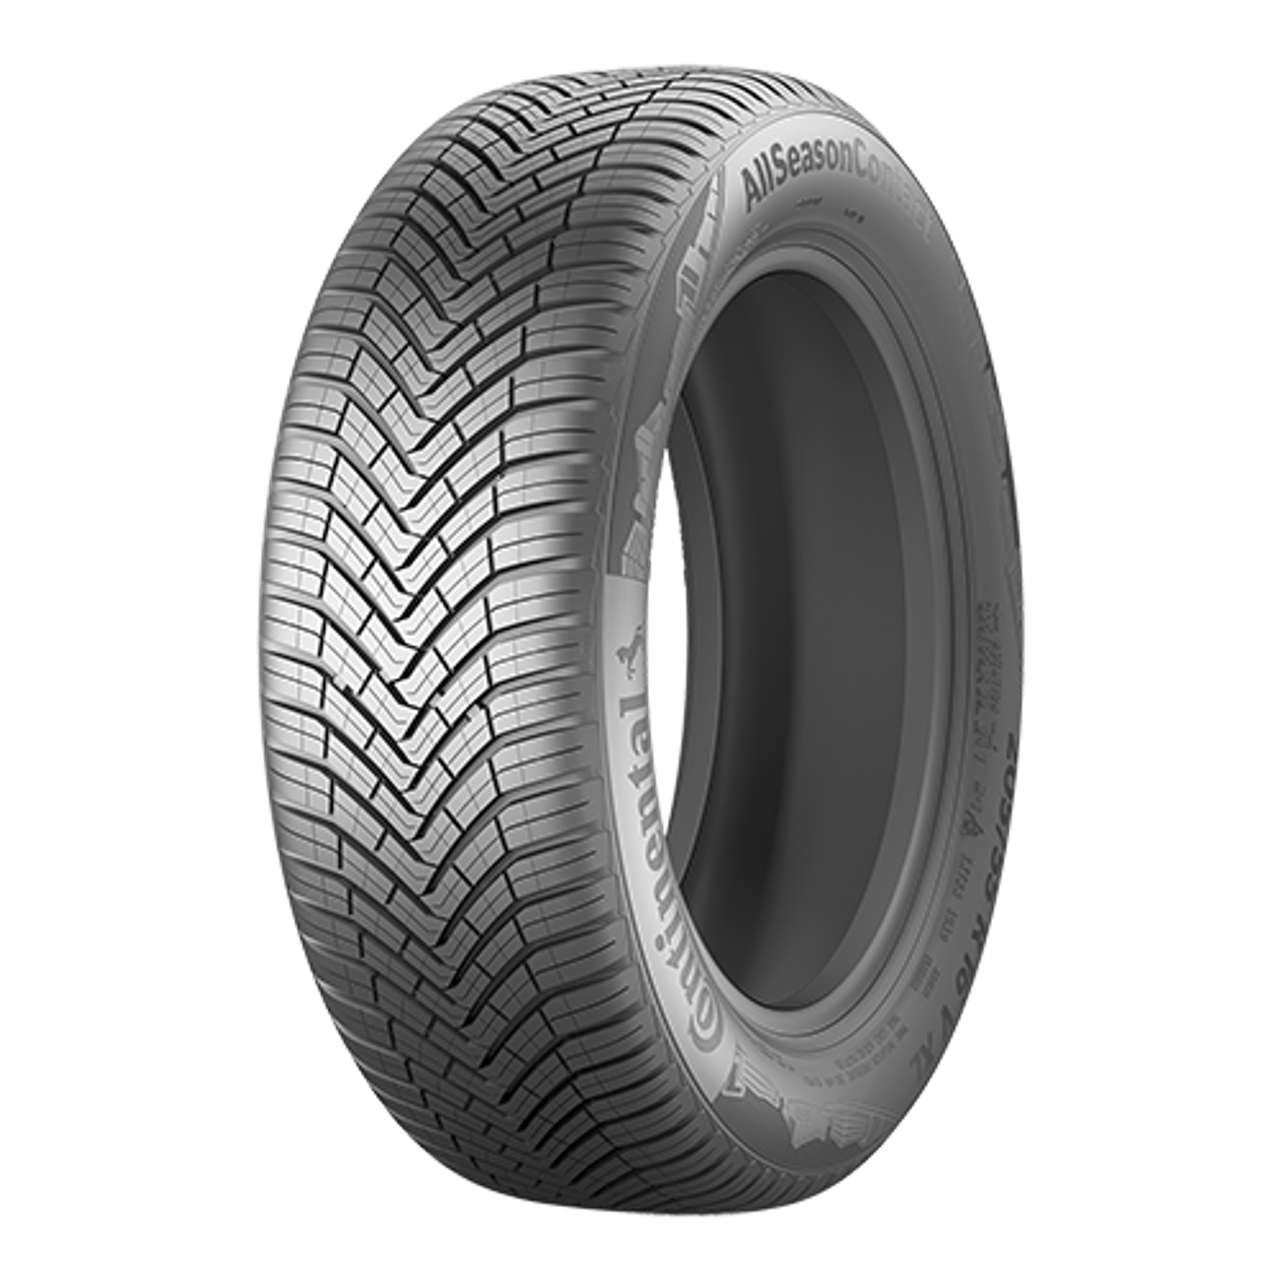 CONTINENTAL ALLSEASONCONTACT (AO) (EVc) 225/55R18 102V BSW